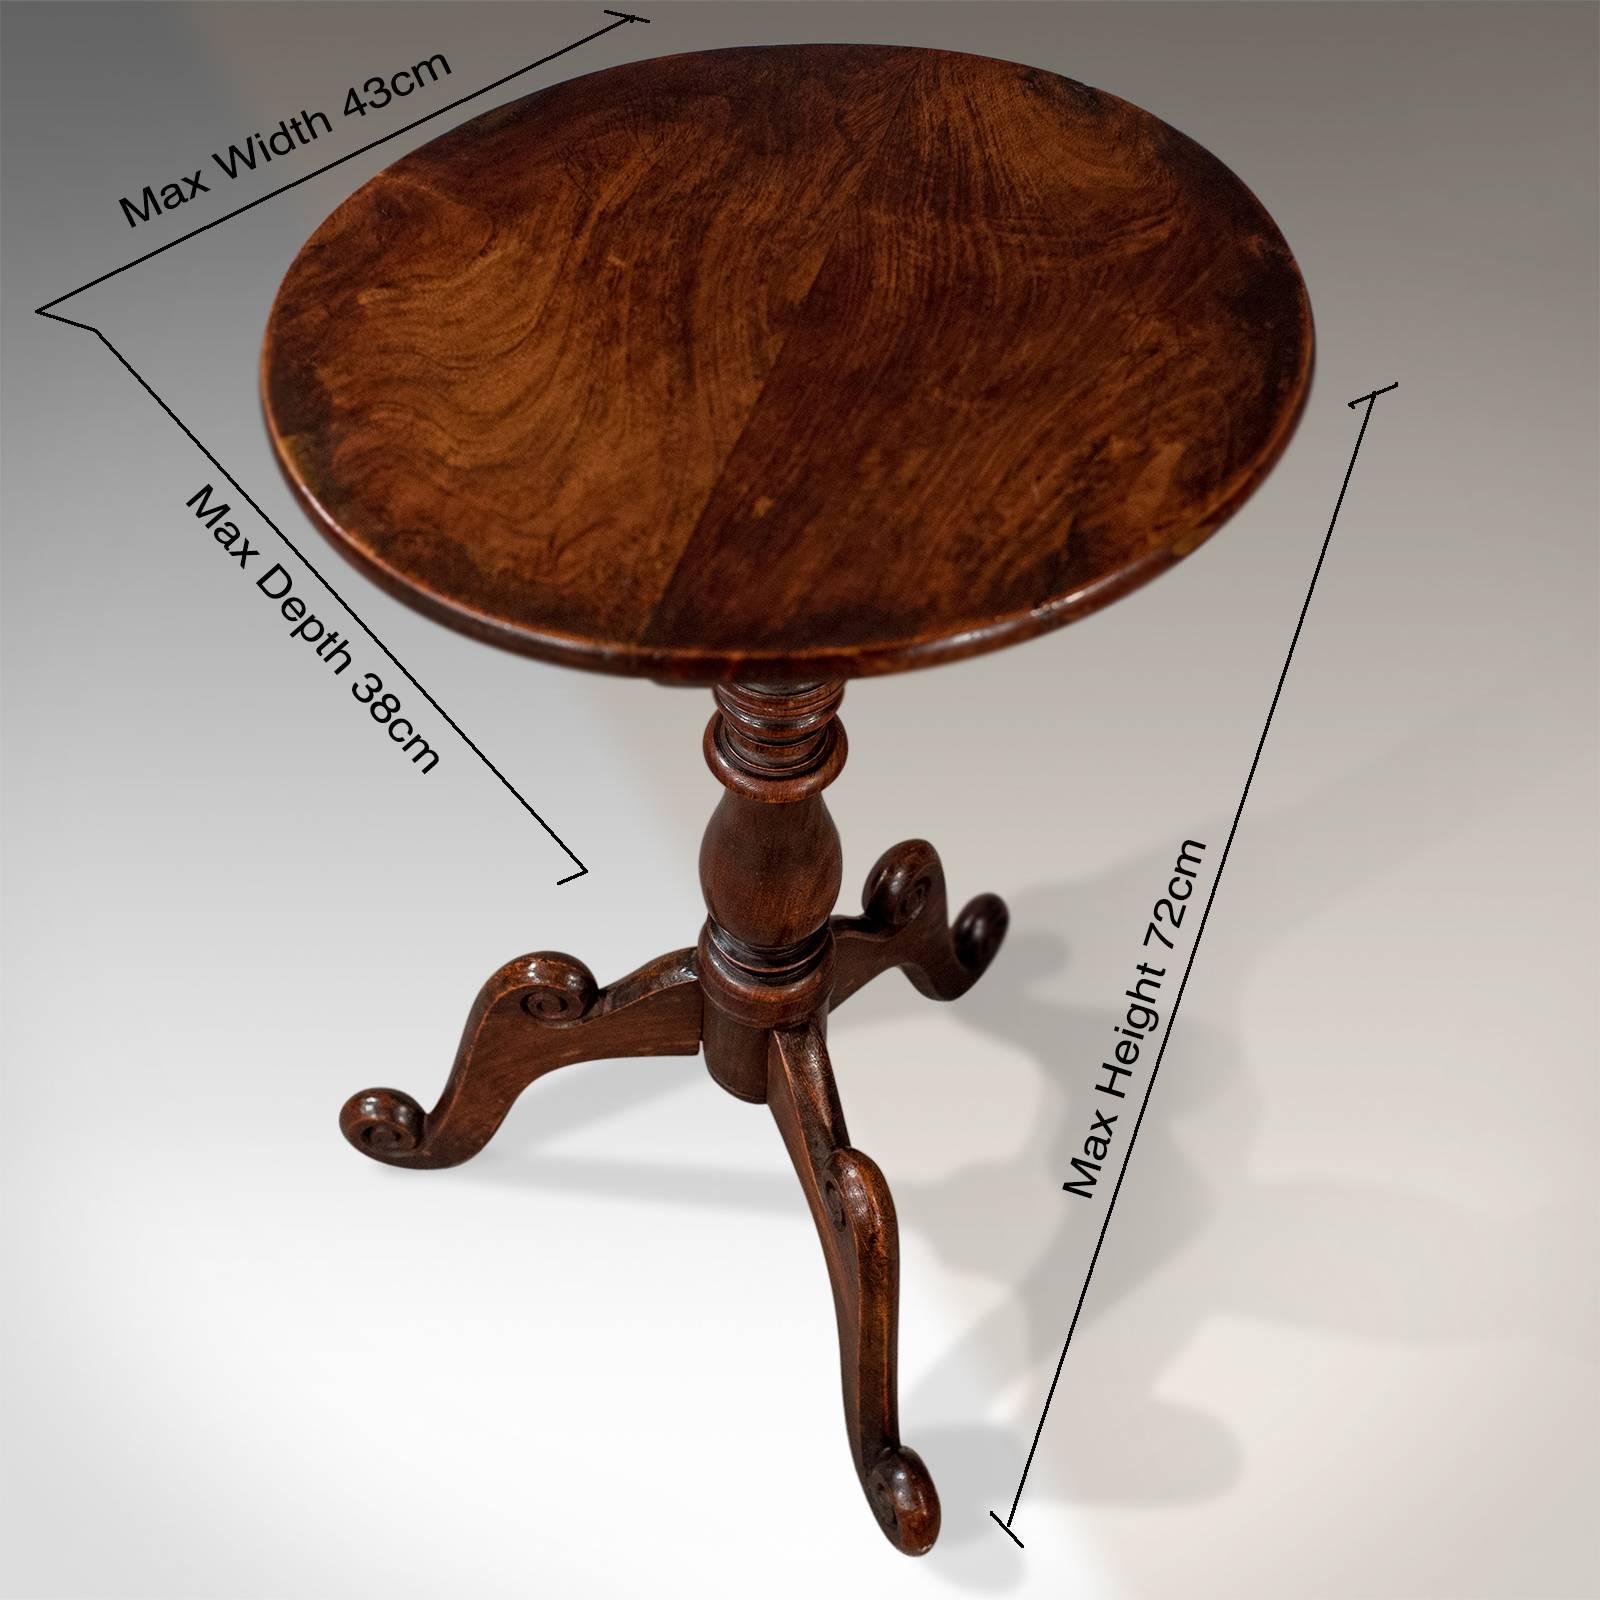 A most pleasing tripod wine table presented in good antique condition
Of Classic English late Georgian quality
Delightfully crafted in walnut
With elliptical top
Rising from scroll carved cabriole legs
Elegant turned stem
Attractive walnut